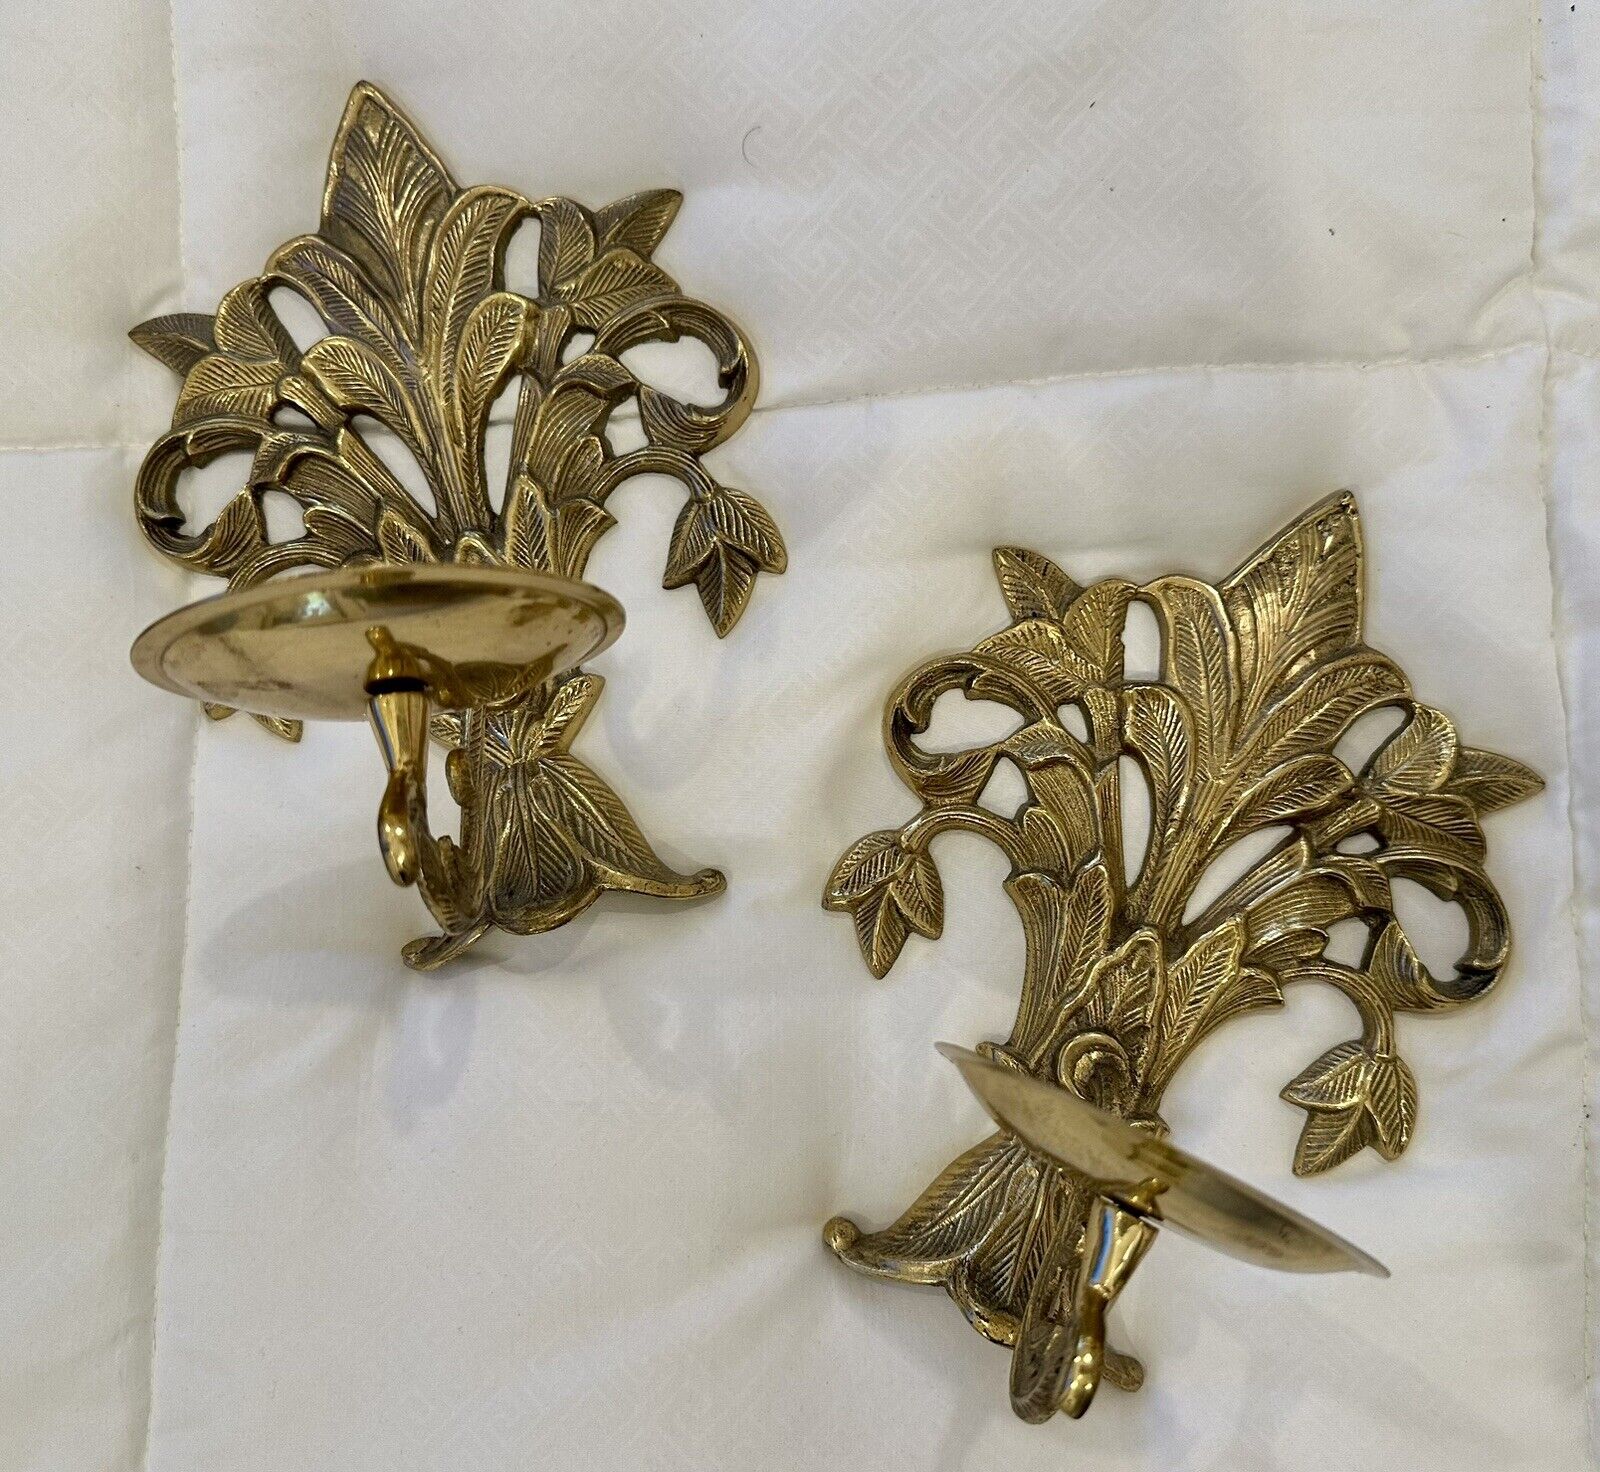 Vintage Pair Solid Brass Leaf Wall Sconces Candle Holders 8.5”